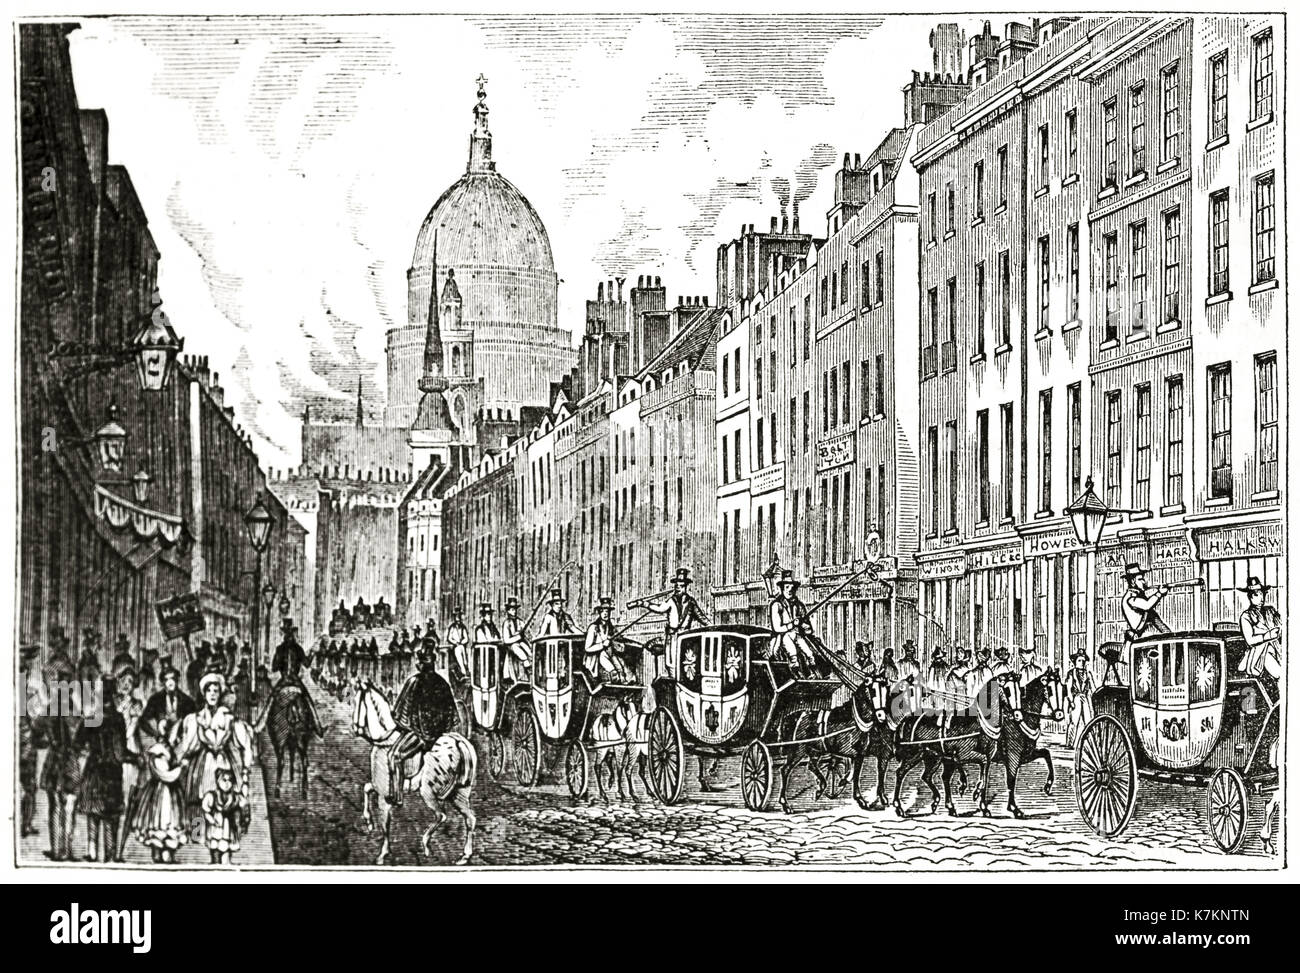 Old view of Fleet street and mail coaches procession, London. By unidentified author, publ. on The Penny Magazine, London, 1837 Stock Photo